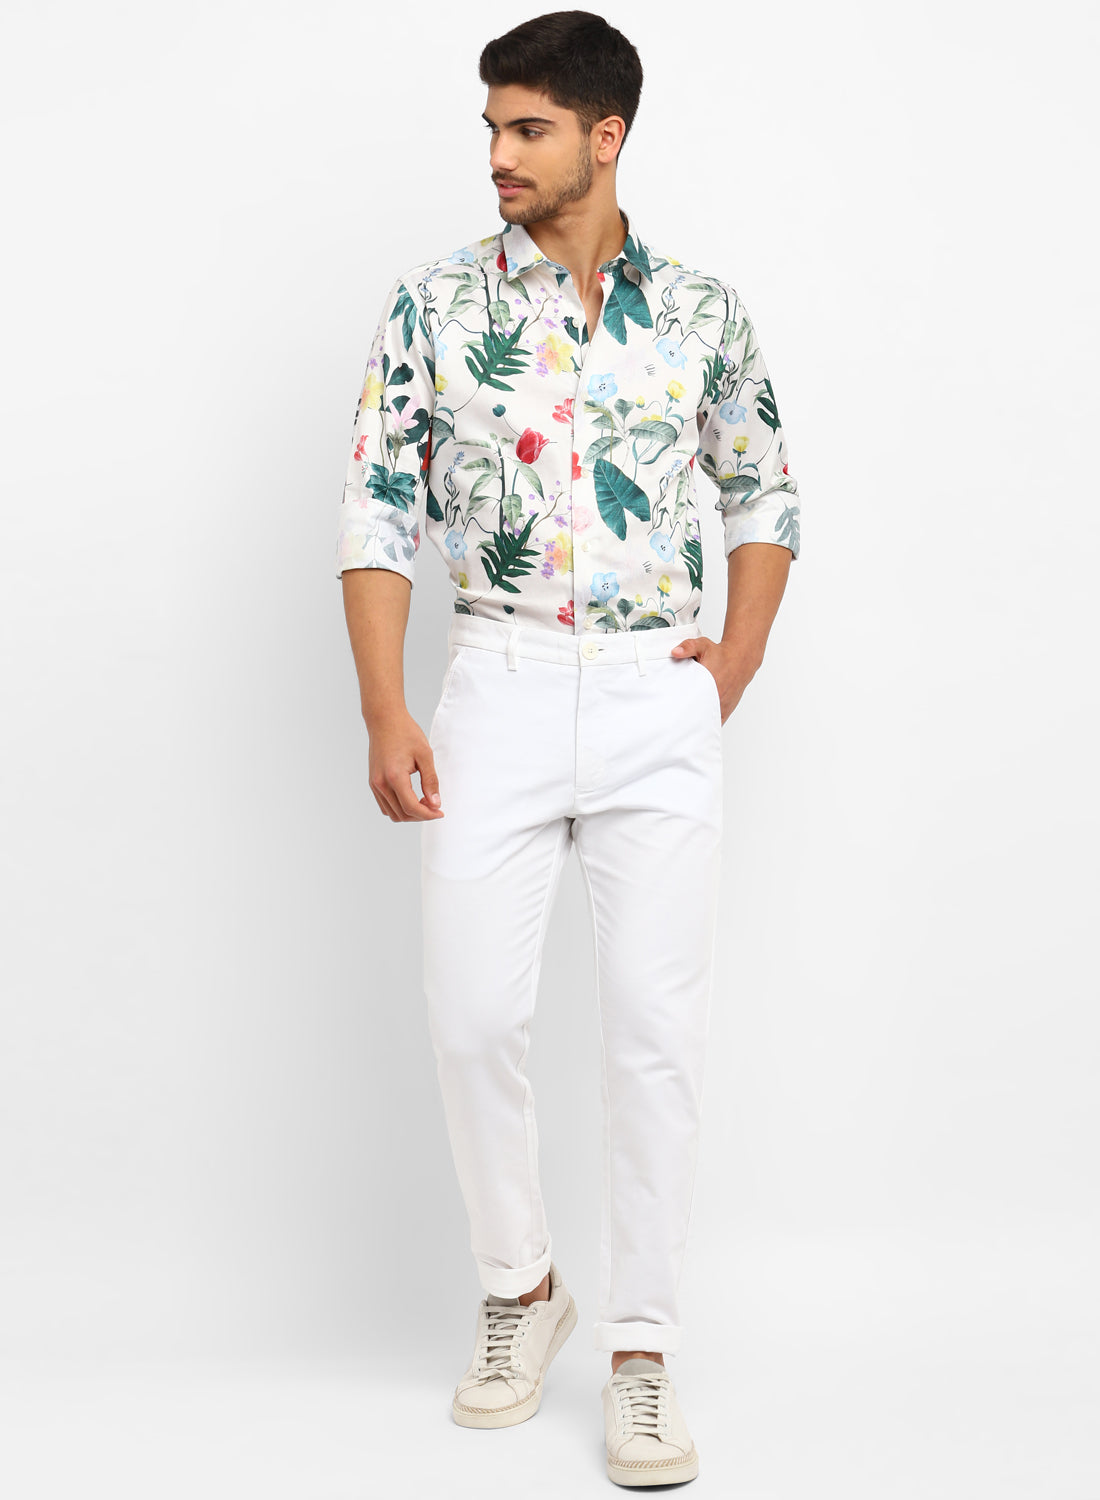 Off white & Green Cotton Printed Casual Shirt